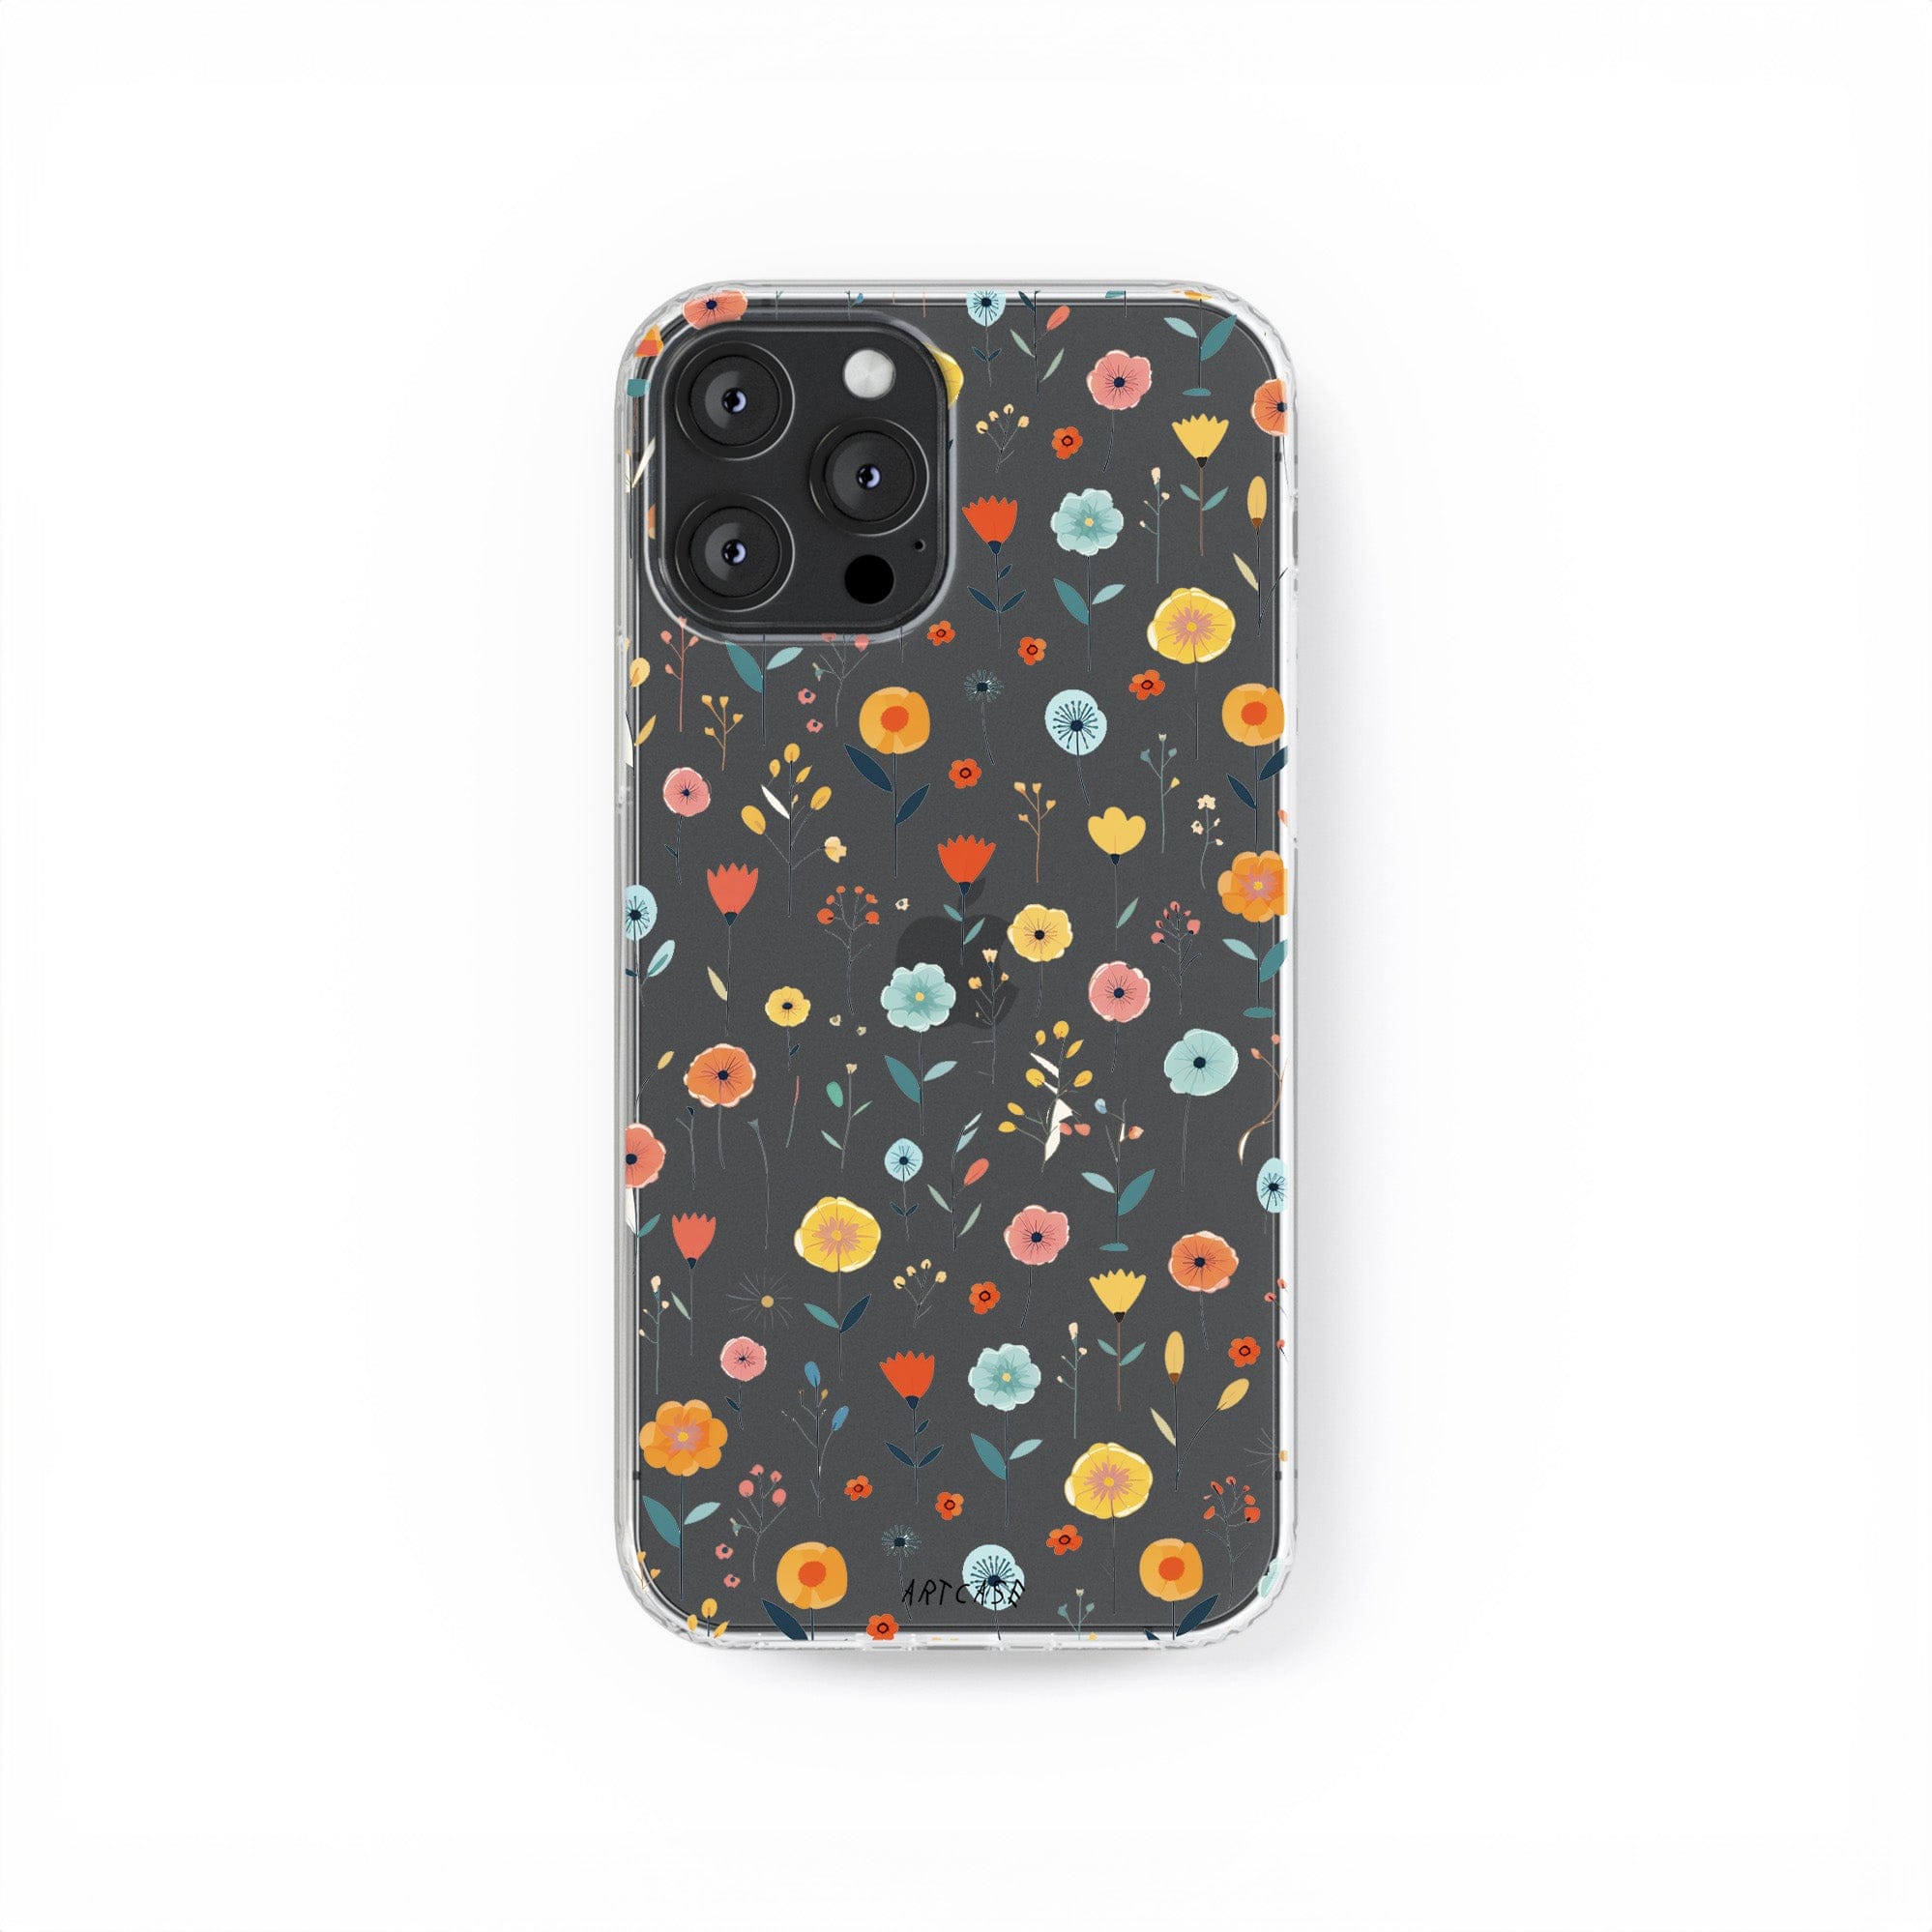 Transparent silicone case "Collage of flowers"